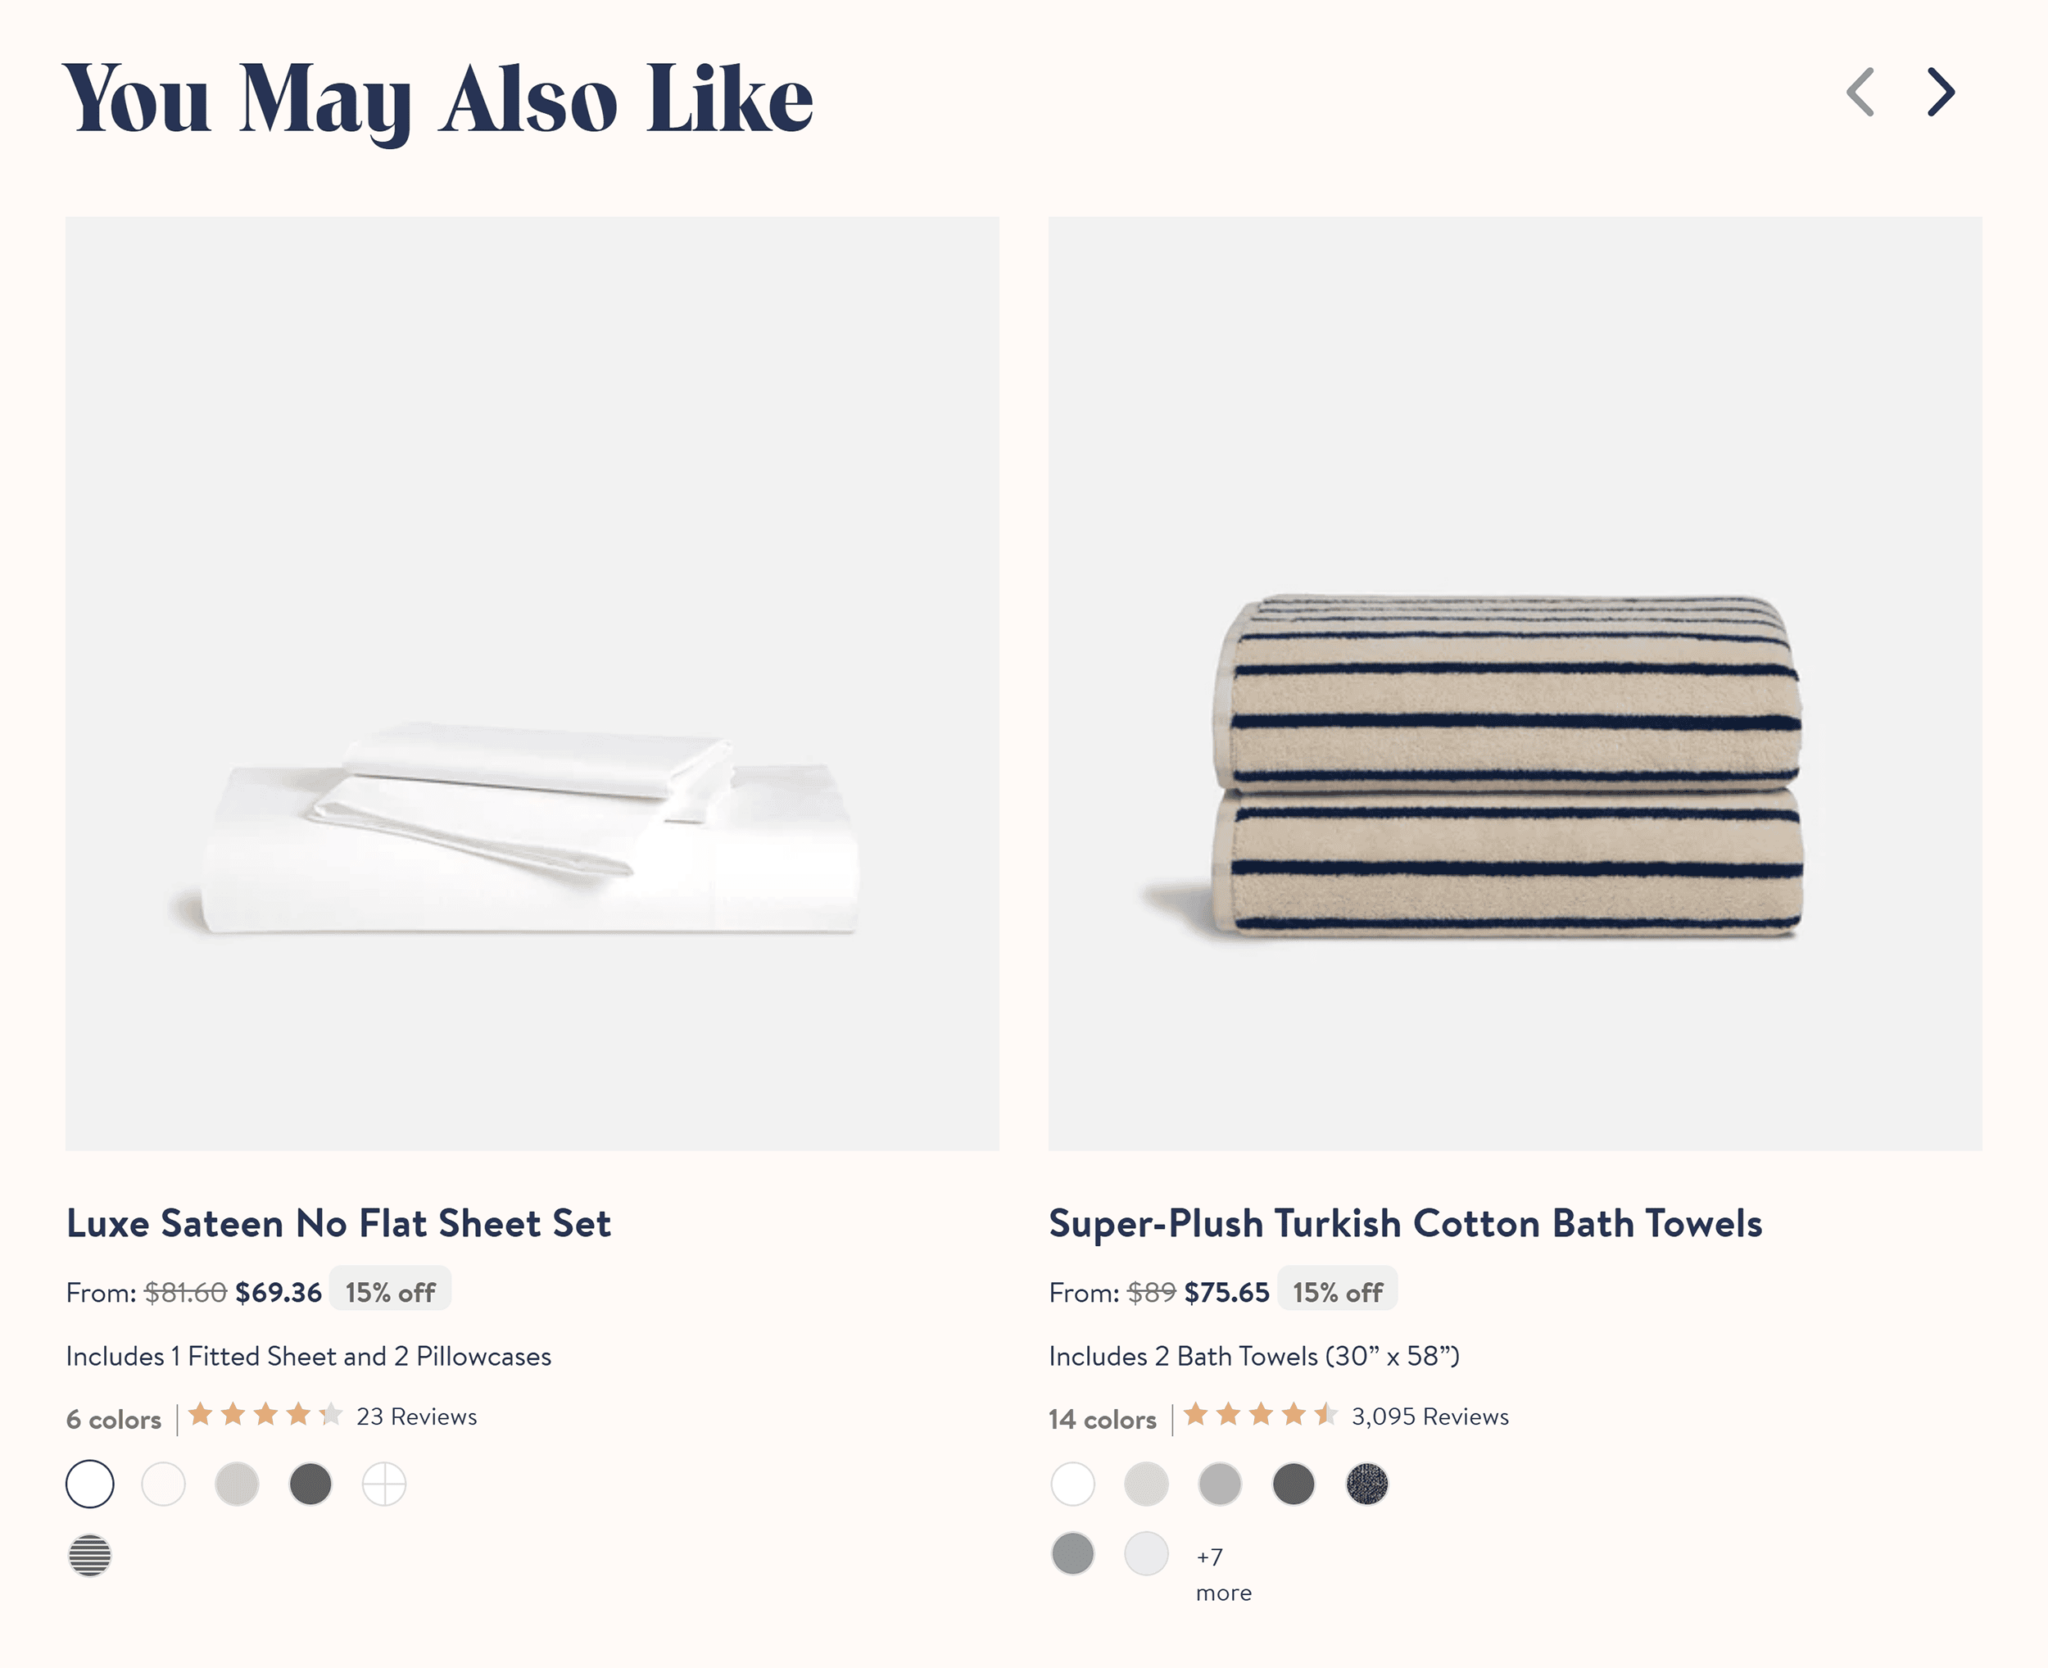 brooklinen-you-may-also-like 20 Effective Product Page Examples (+ Best Practices)